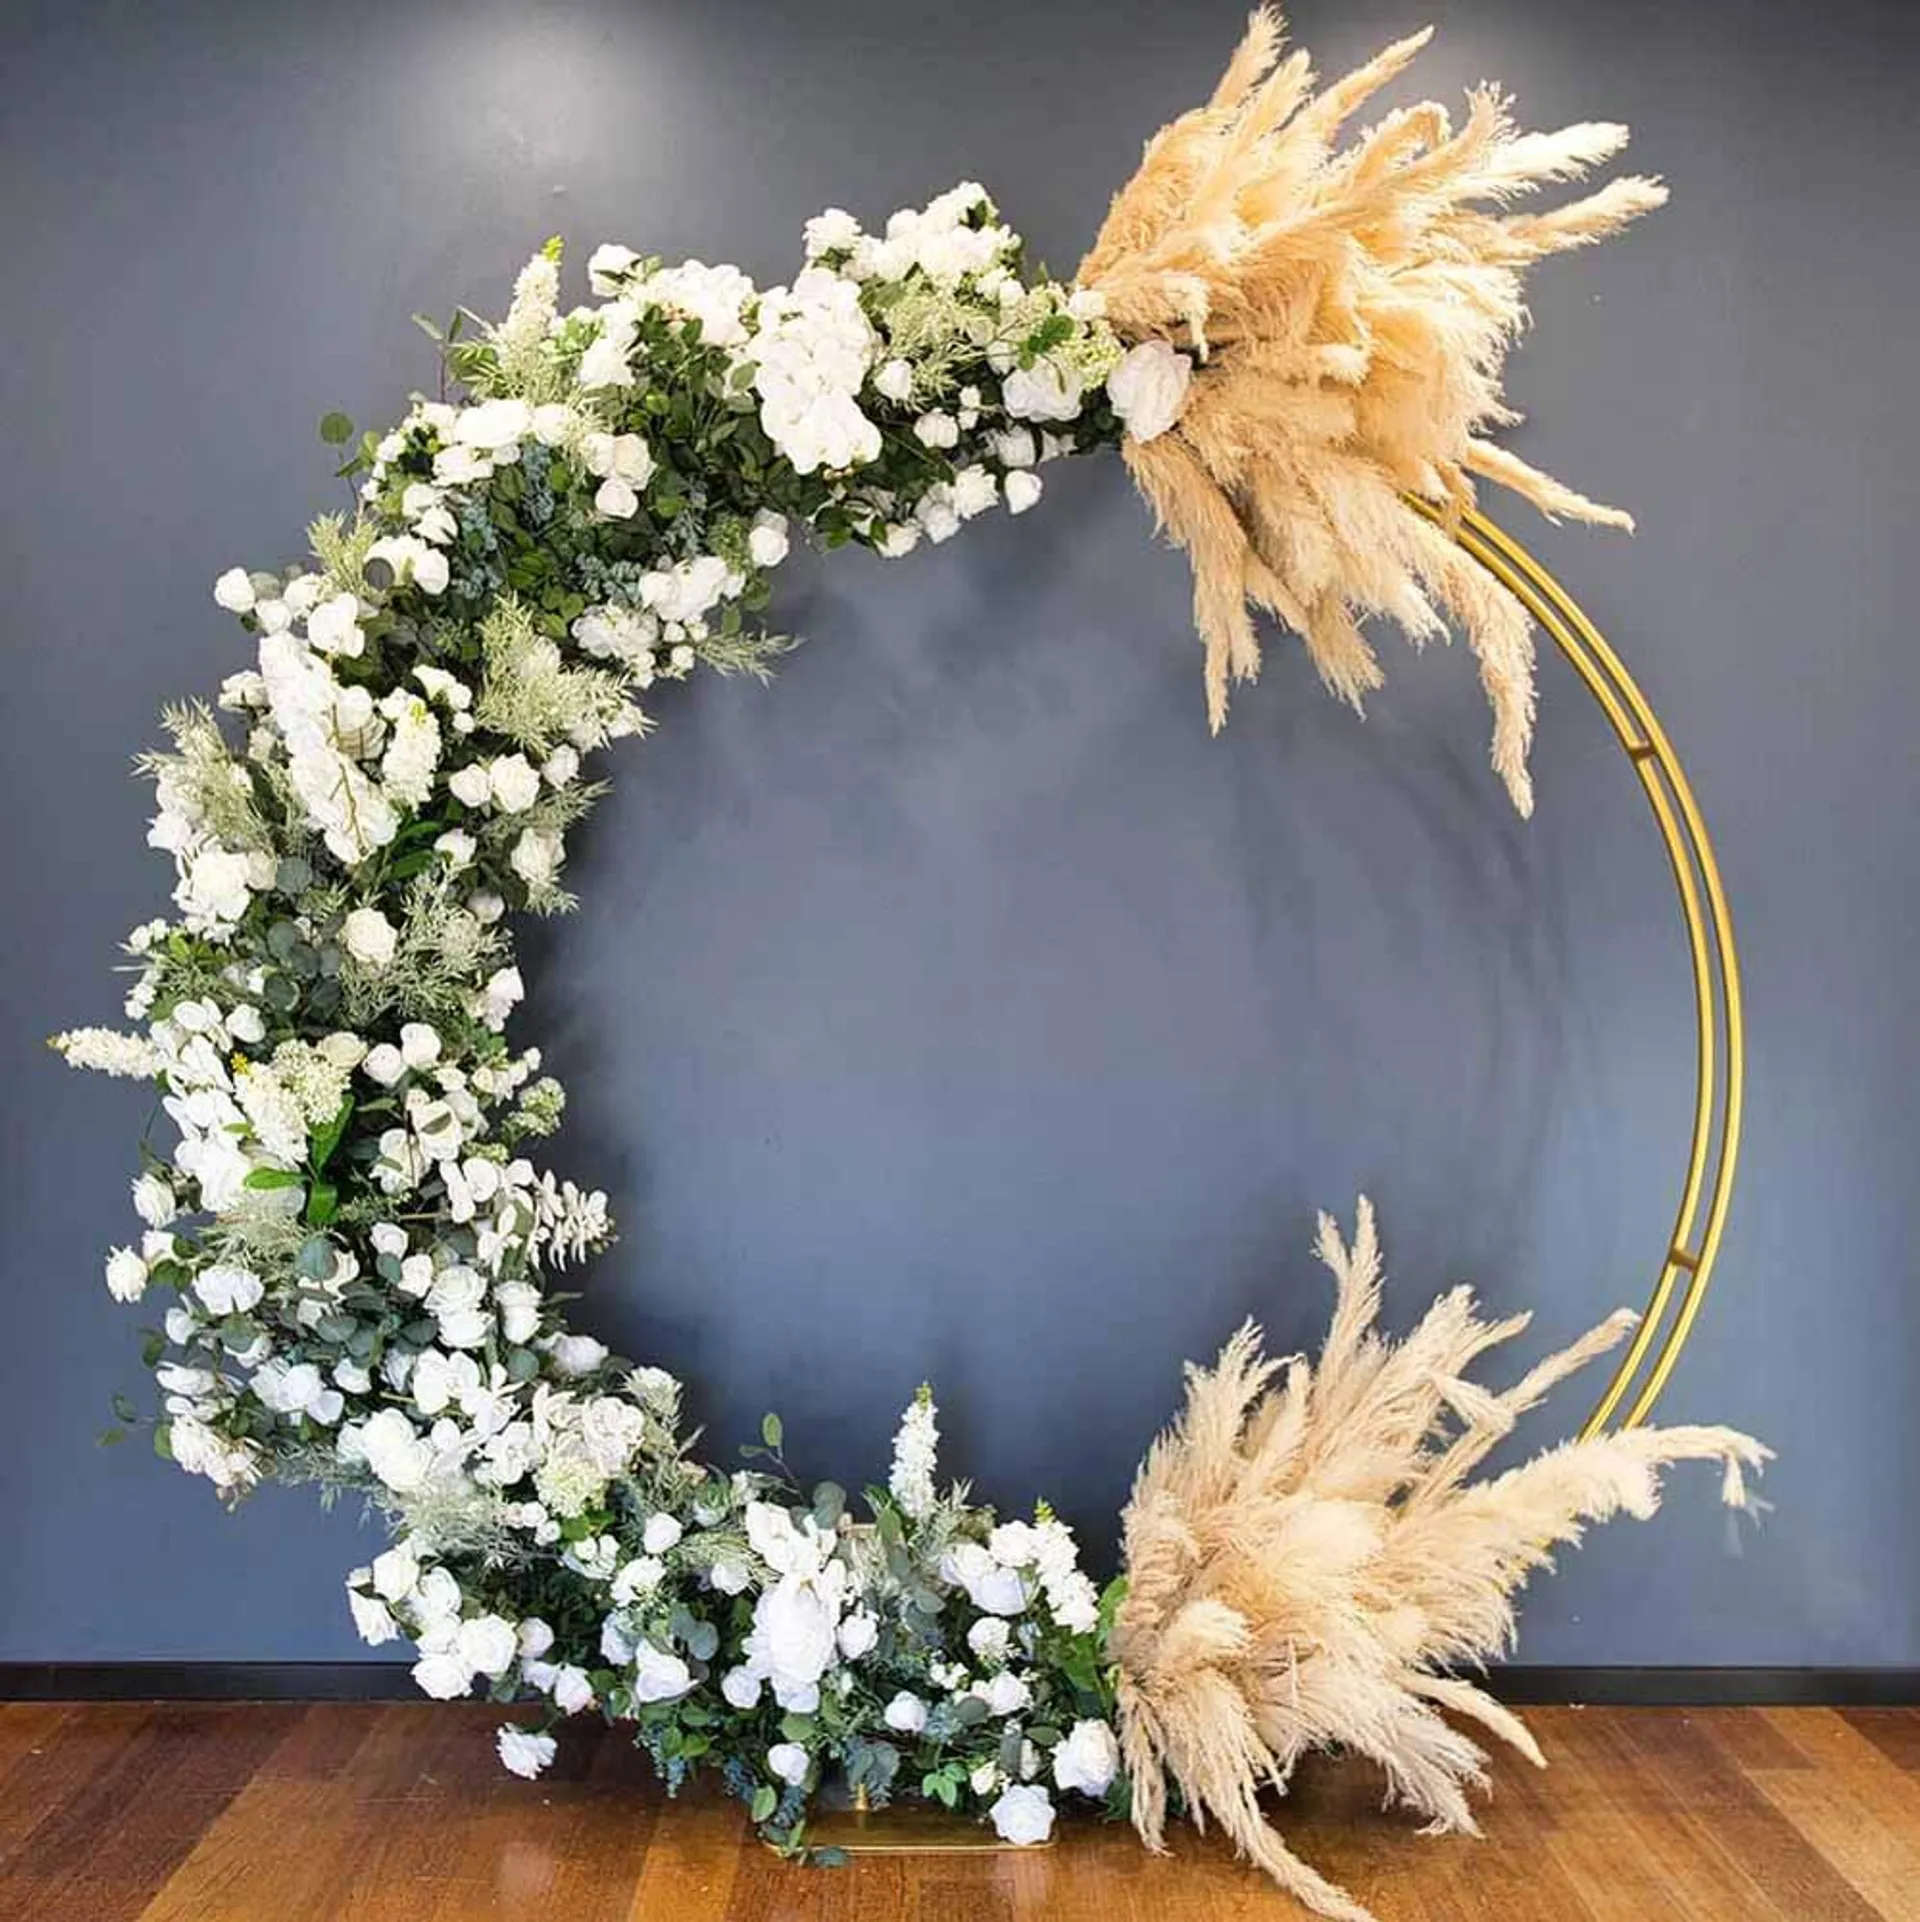 Floral Arc Hoop with Artificial Foliage, White Flowers & Pampas 2.4m HIRE